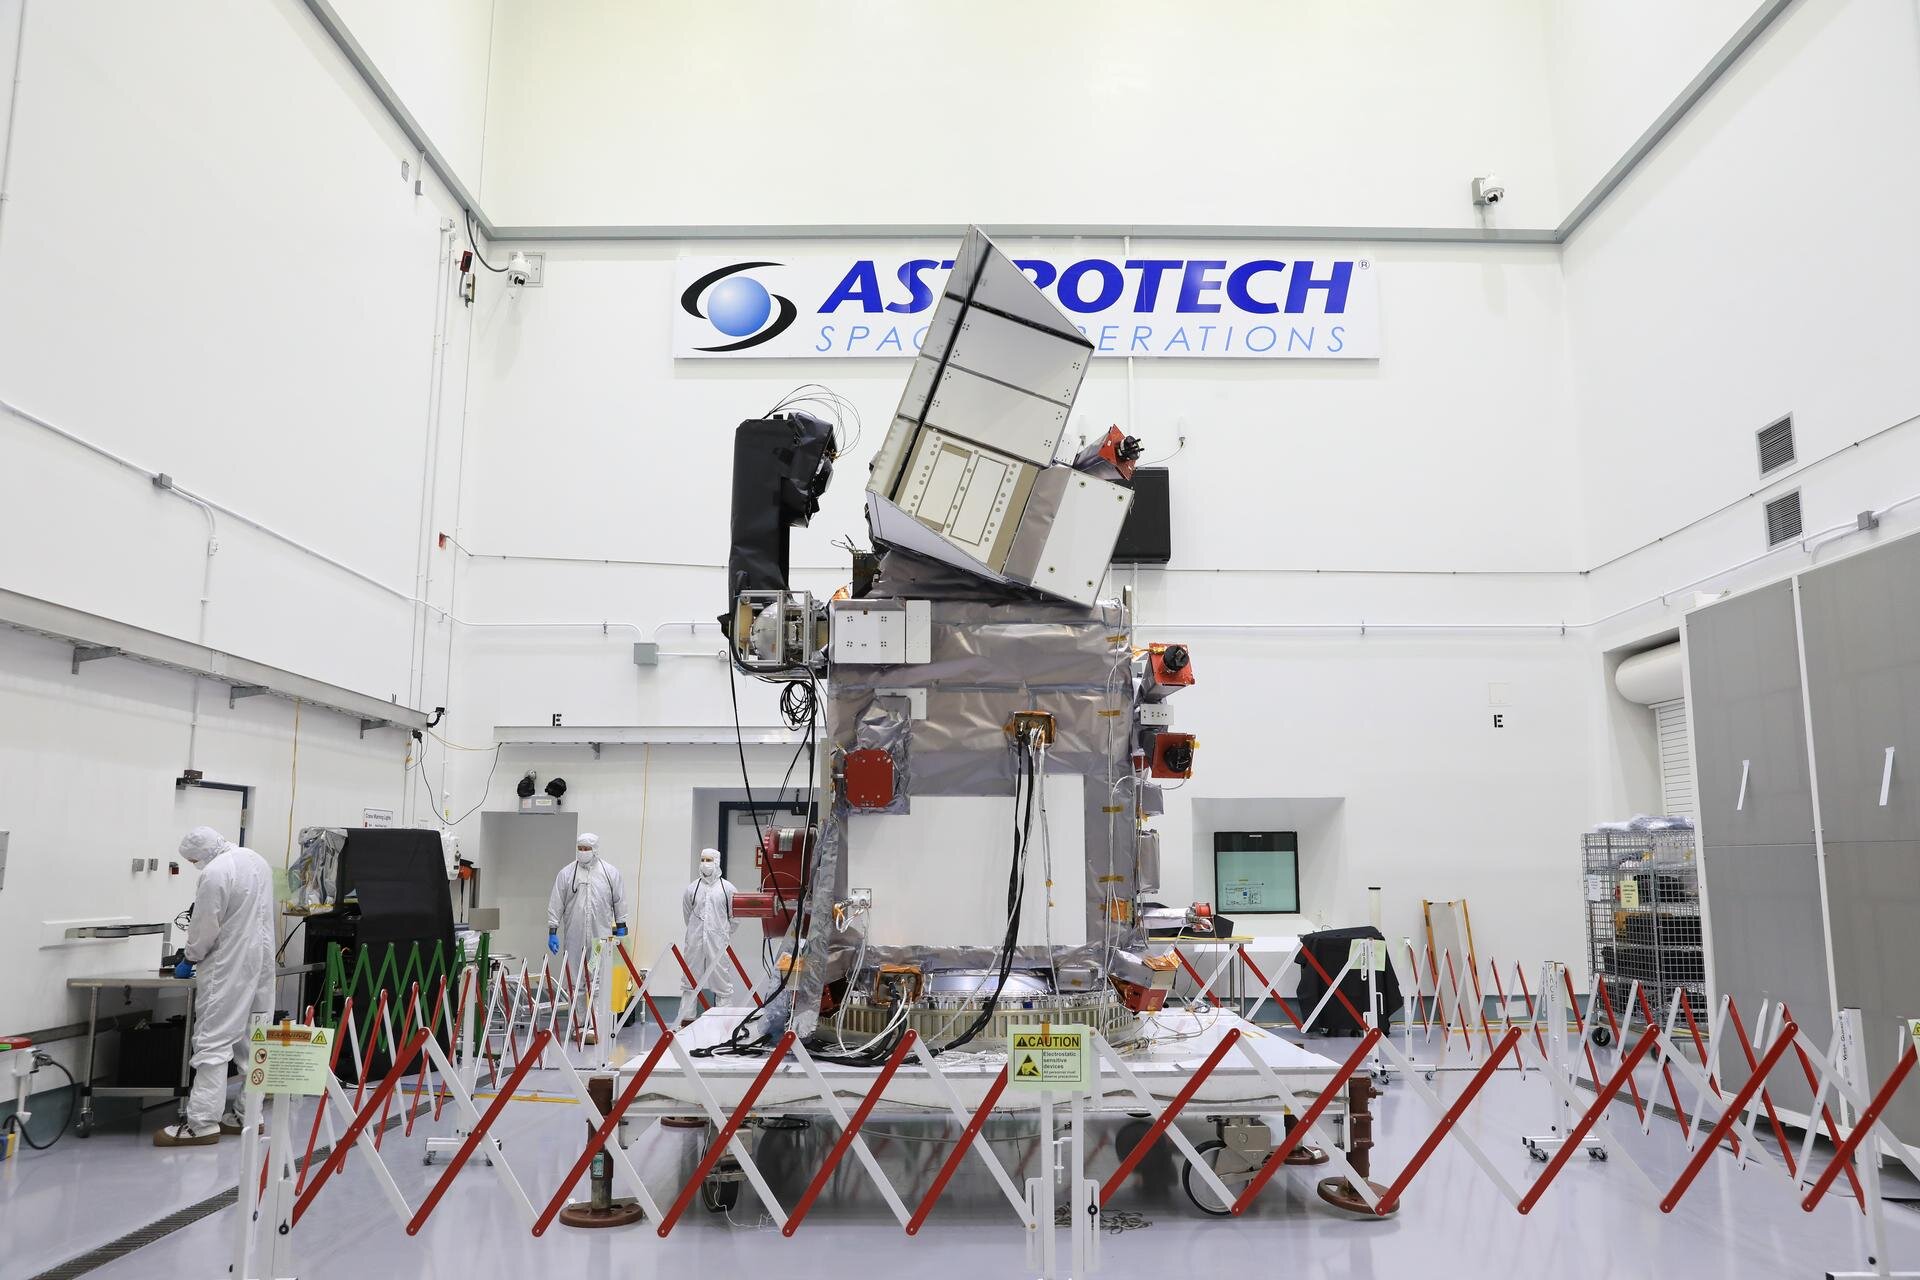 PACE testing and preparation continues for launch in early 2024 - Phys.org